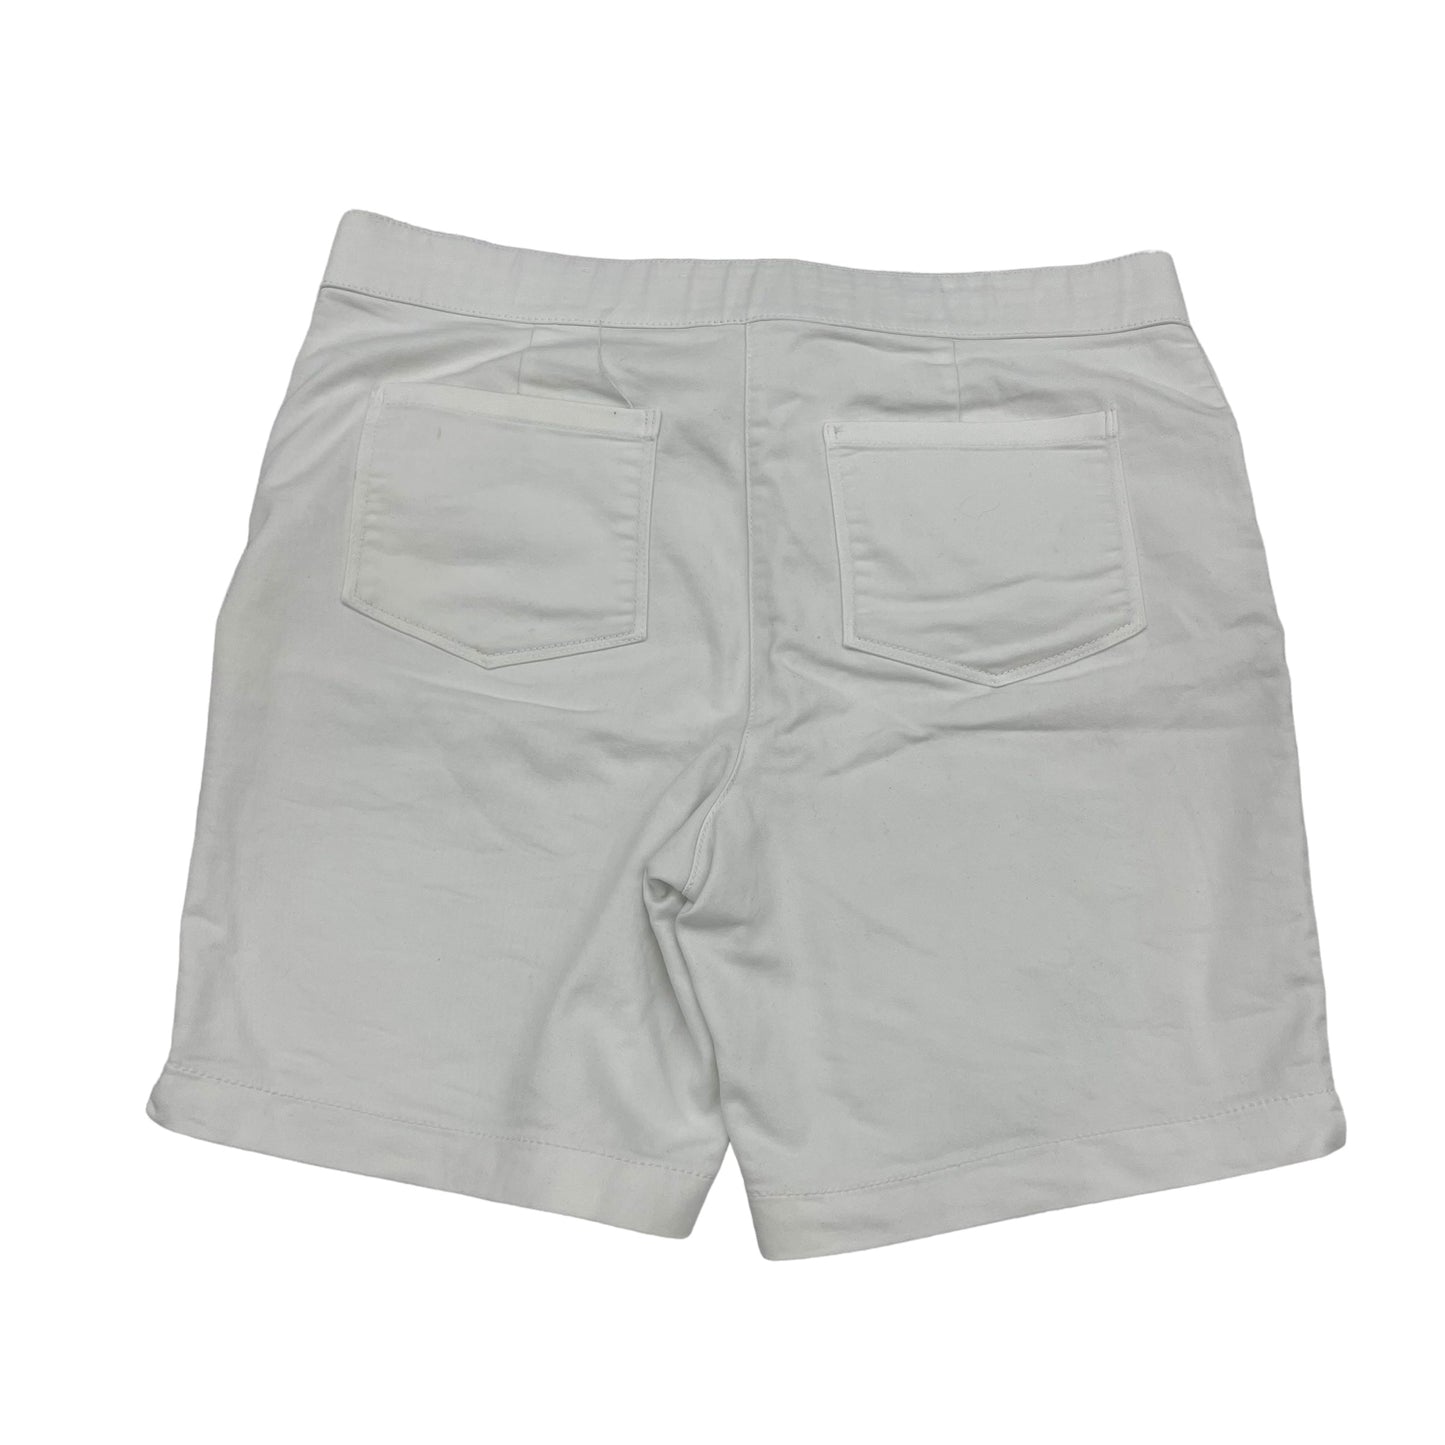 Shorts By Coral Bay  Size: 12petite